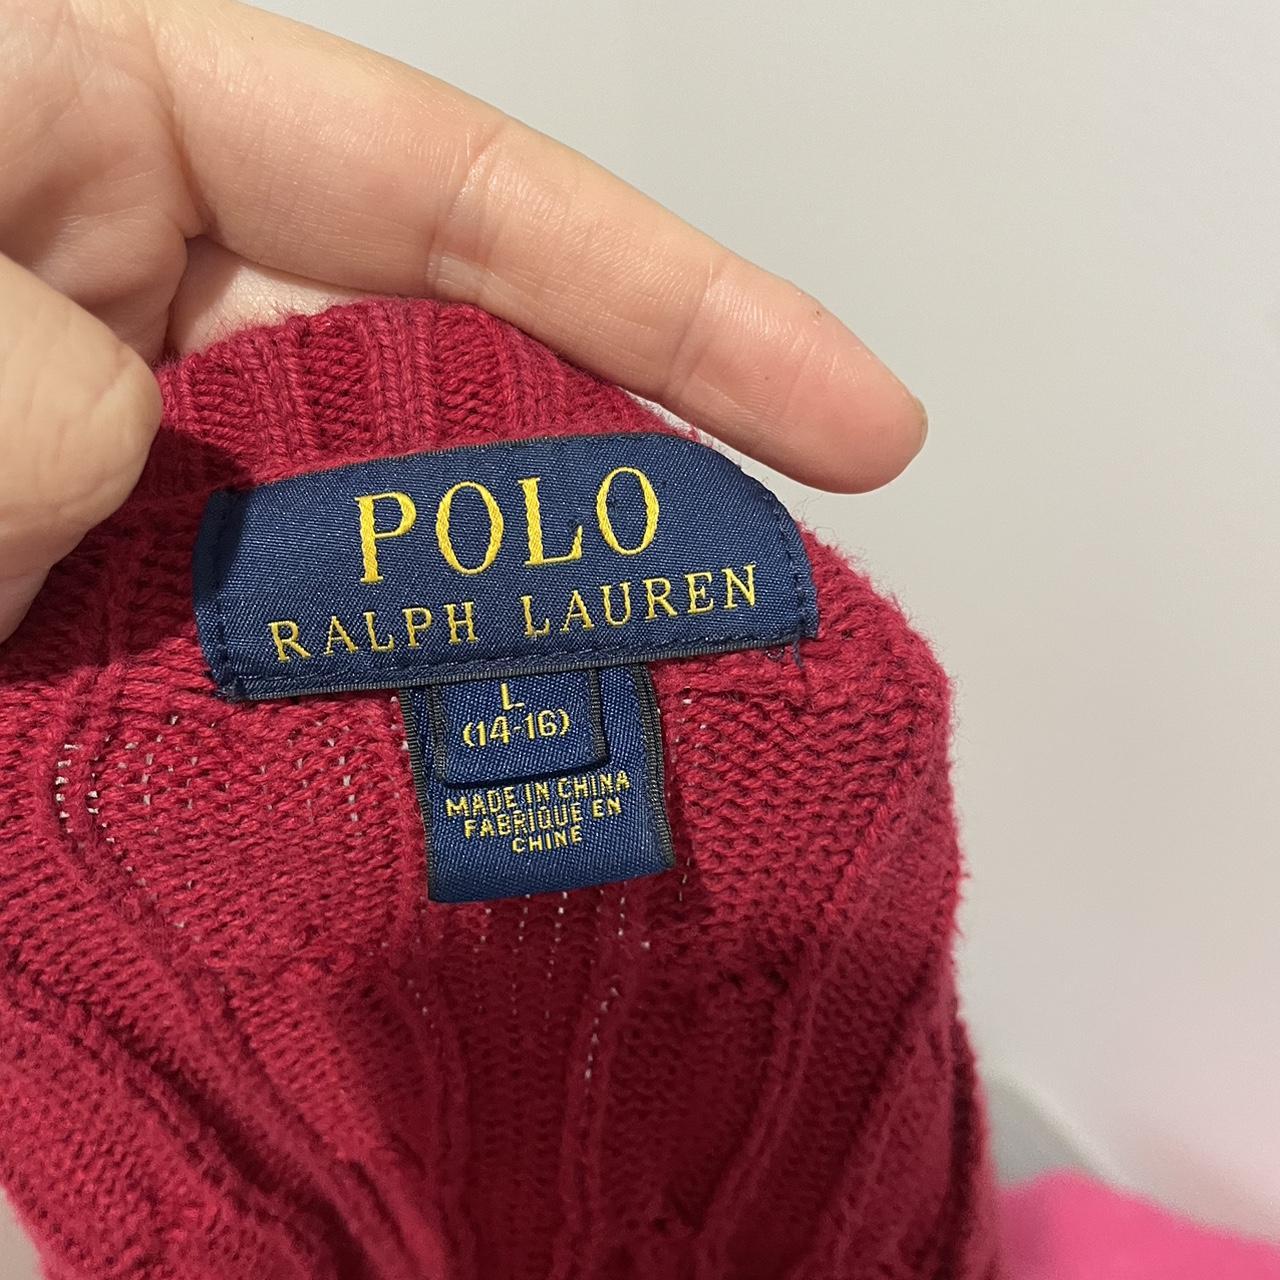 Polo Ralph Lauren red cable knit sweater with blue logo - Depop